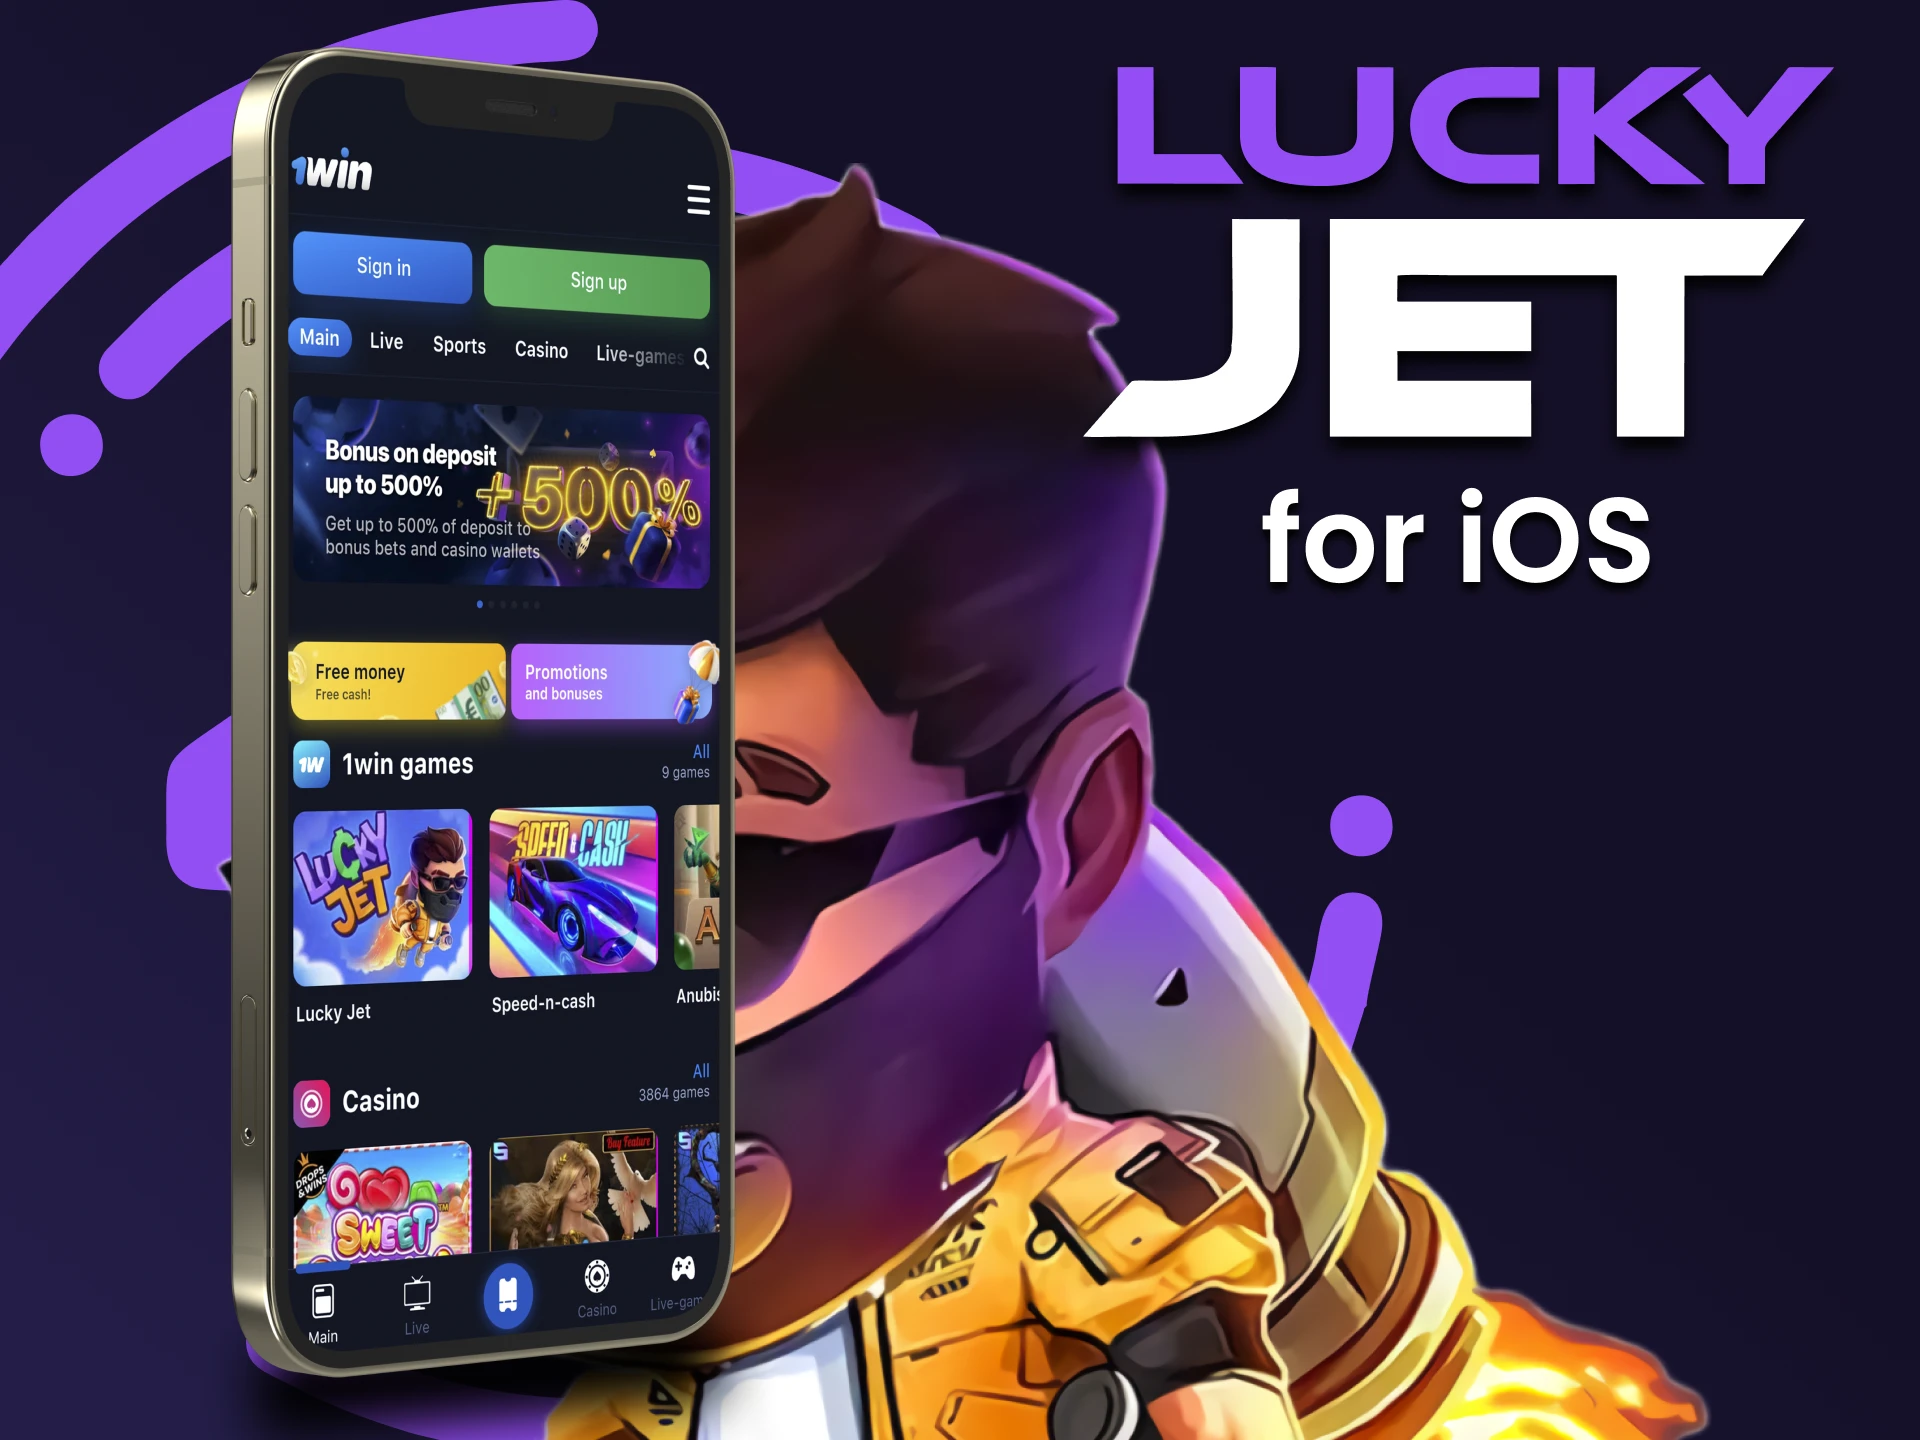 Download the app to play Lucky Jet for iOS.